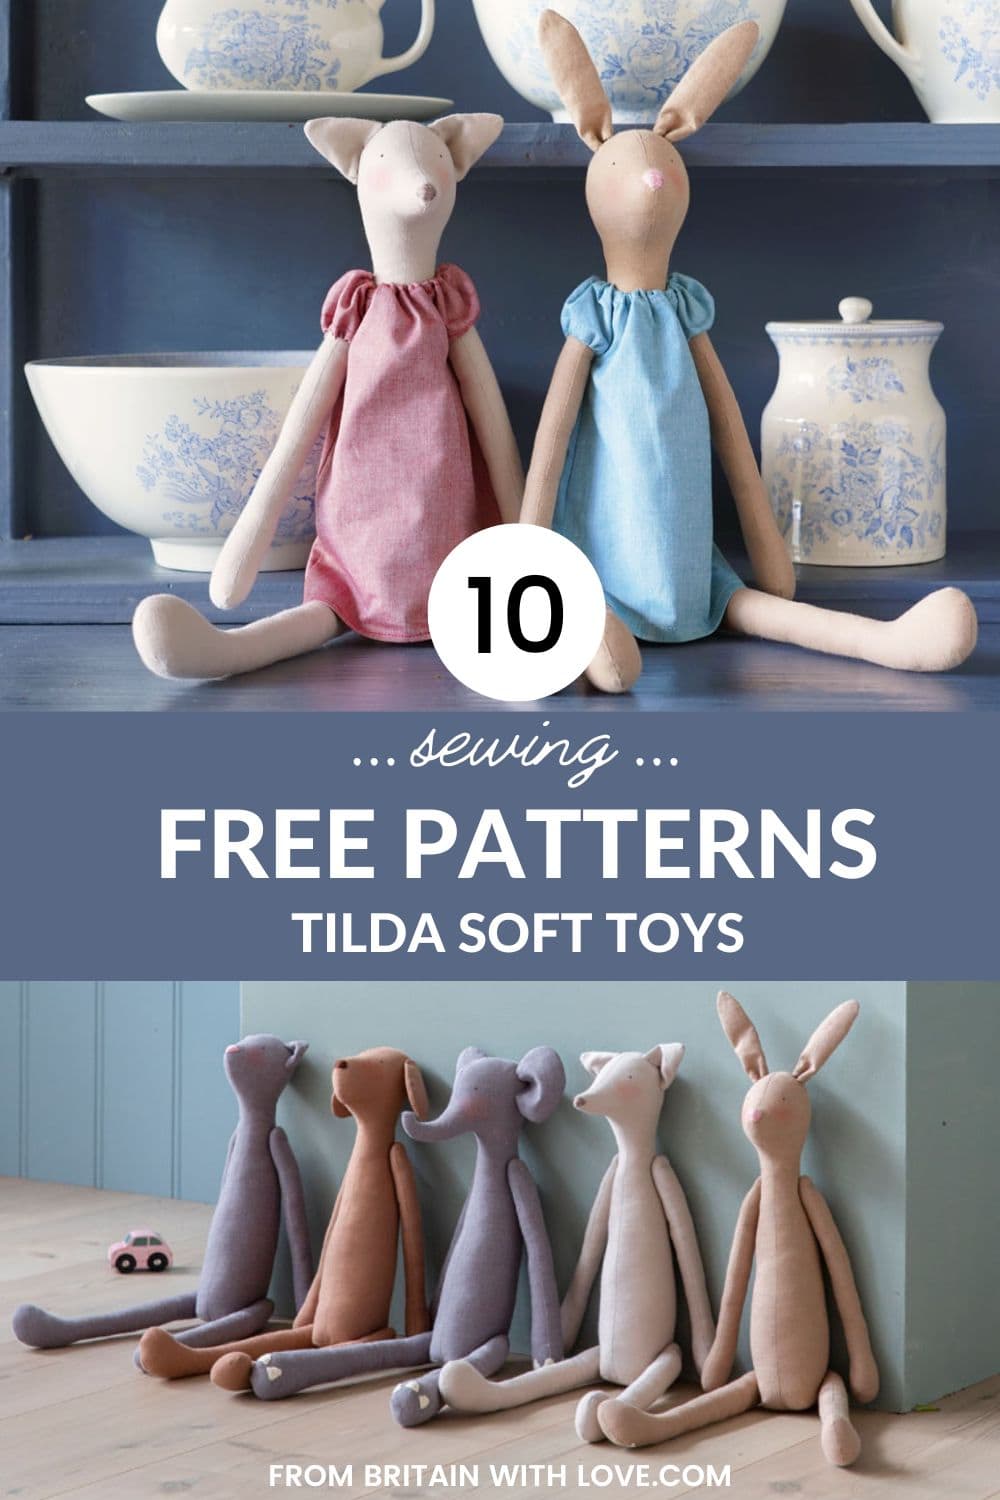 10 free tilda friends soft toy sewing patterns including adorable cow, fox, cat, dog, pig, giraffe, elephant, bunny rabbit, hare and frog patterns - all designed to fit the same size clothes. I've shared all the info and links you need to get your 10 free Tilda patterns now. Hope you enjoy!